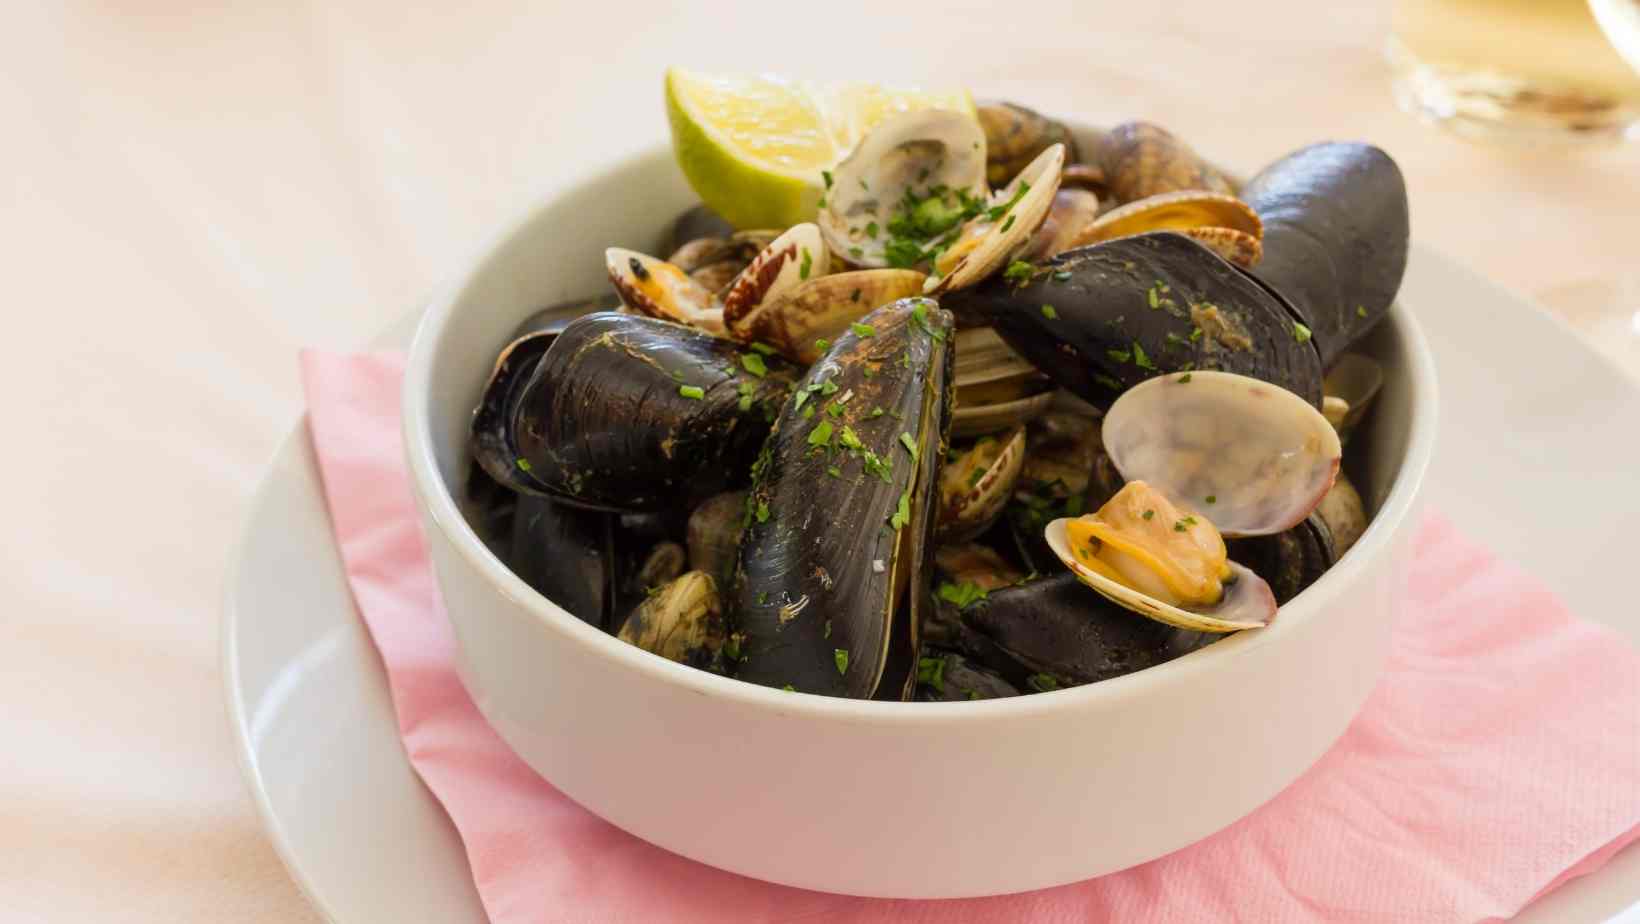 Mussels and Clams - Food to Eat to Lower Your Risk of Depression